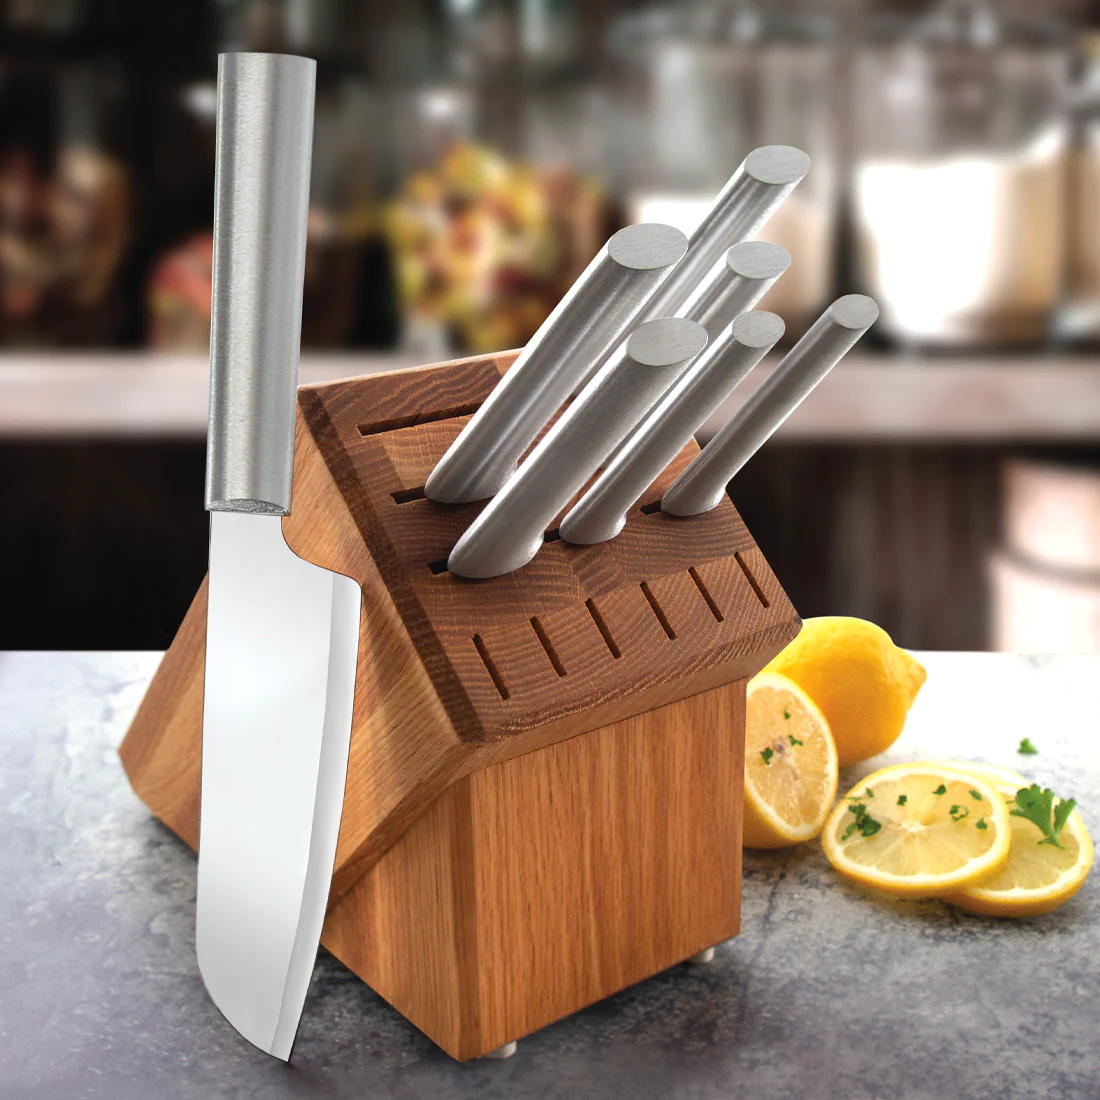 You are currently viewing The Versatility and Functionality of Knife Blocks